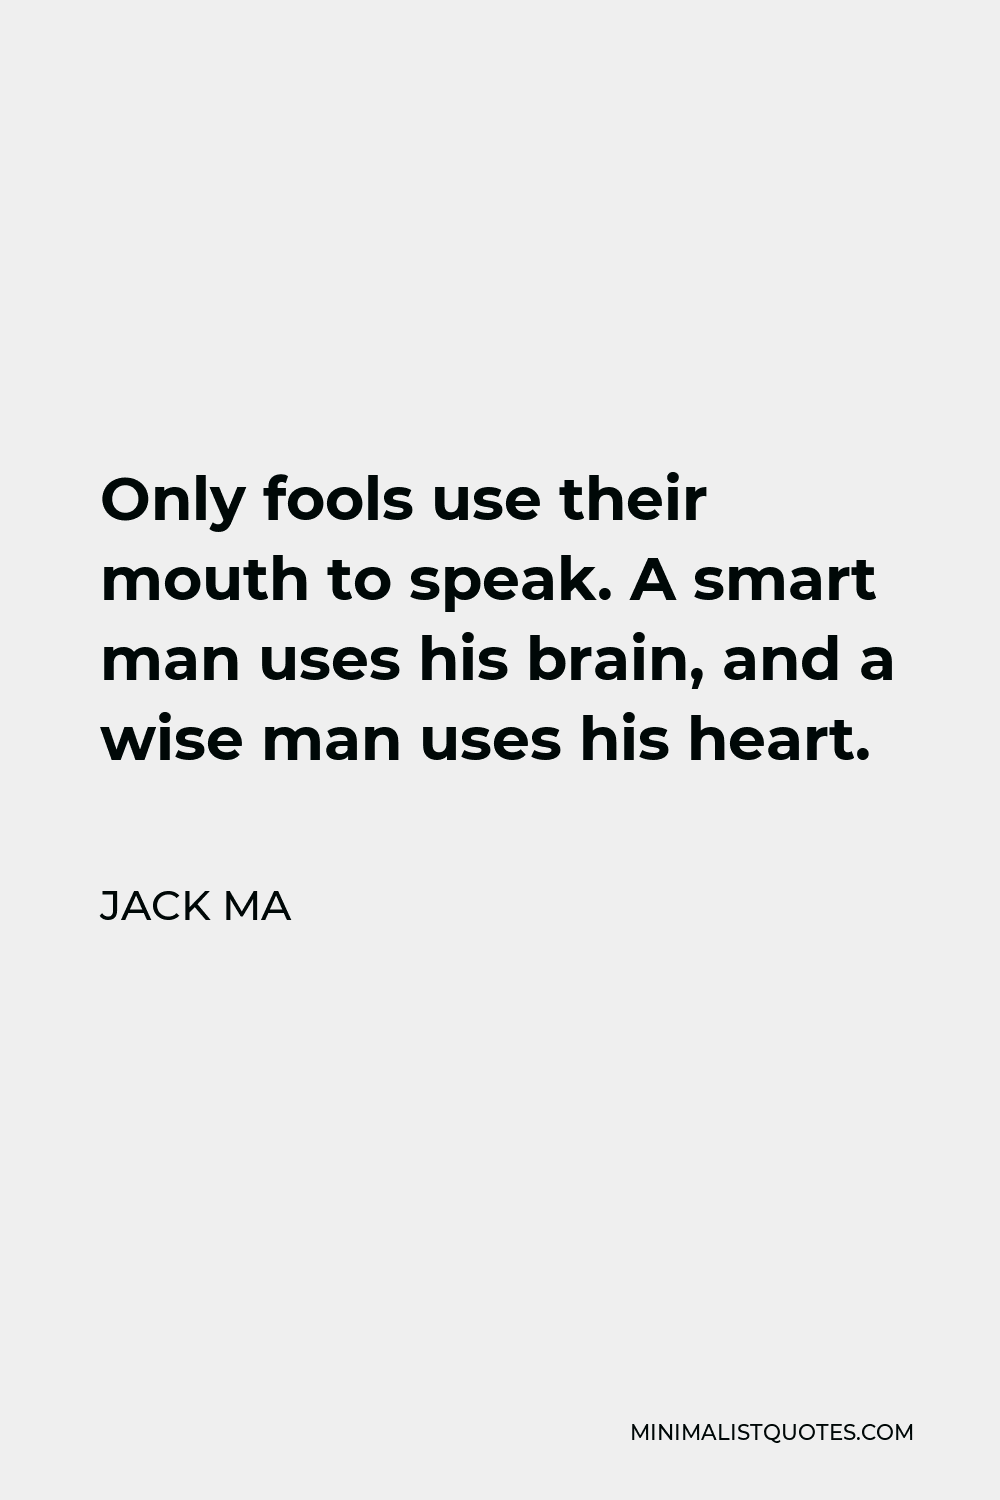 Jack Ma Quote - Only fools use their mouth to speak. A smart man uses his brain, and a wise man uses his heart.